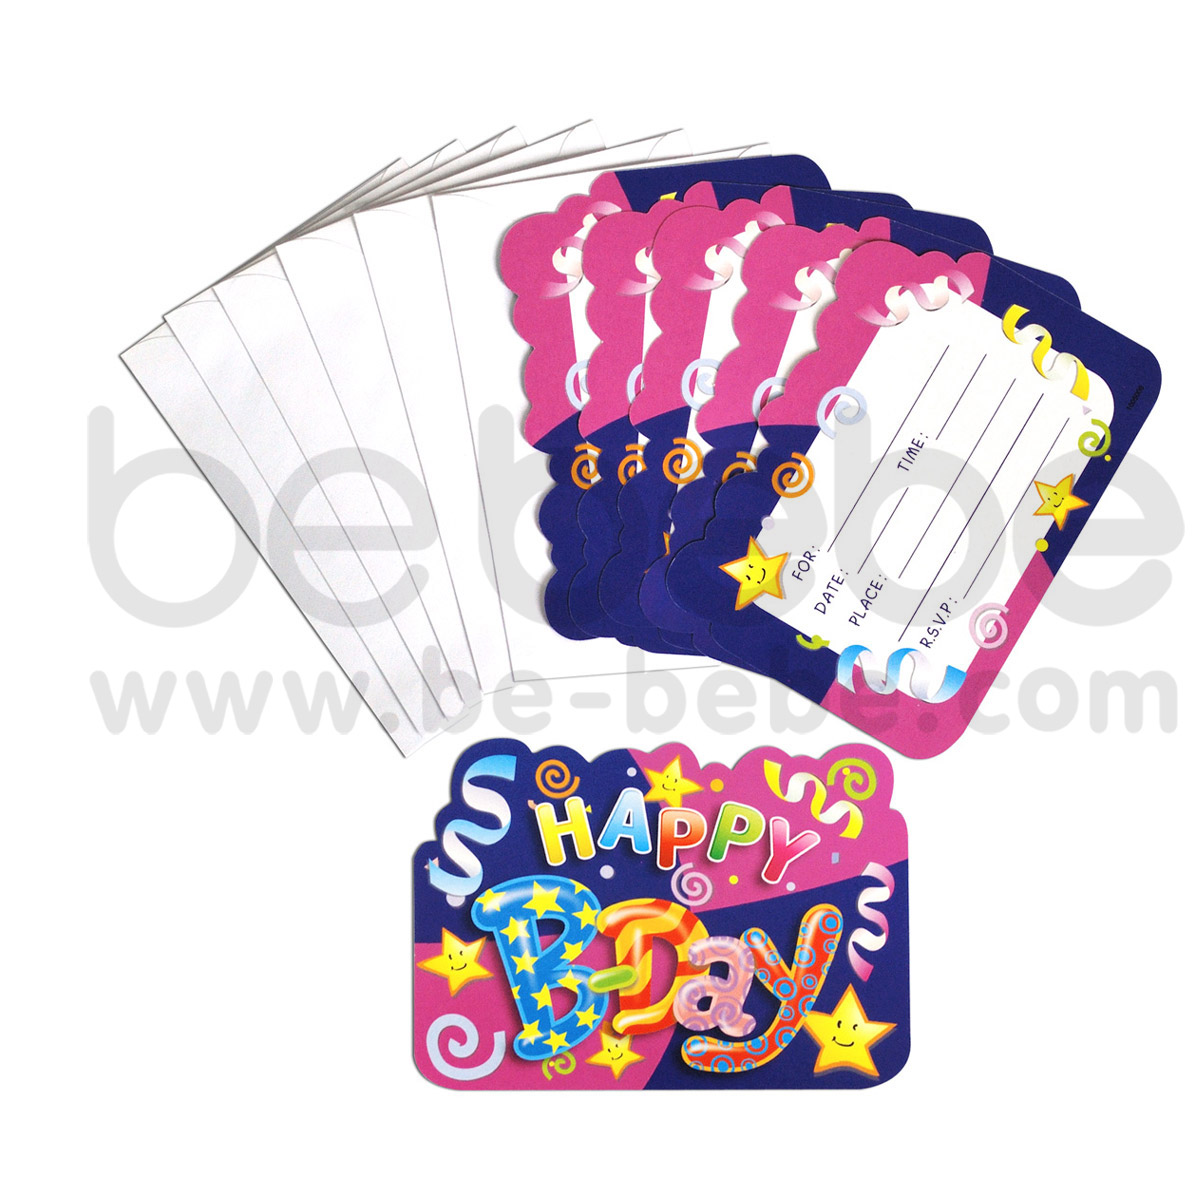 PARTY BUG : Invitation card 10x14 cm., 1 Pack